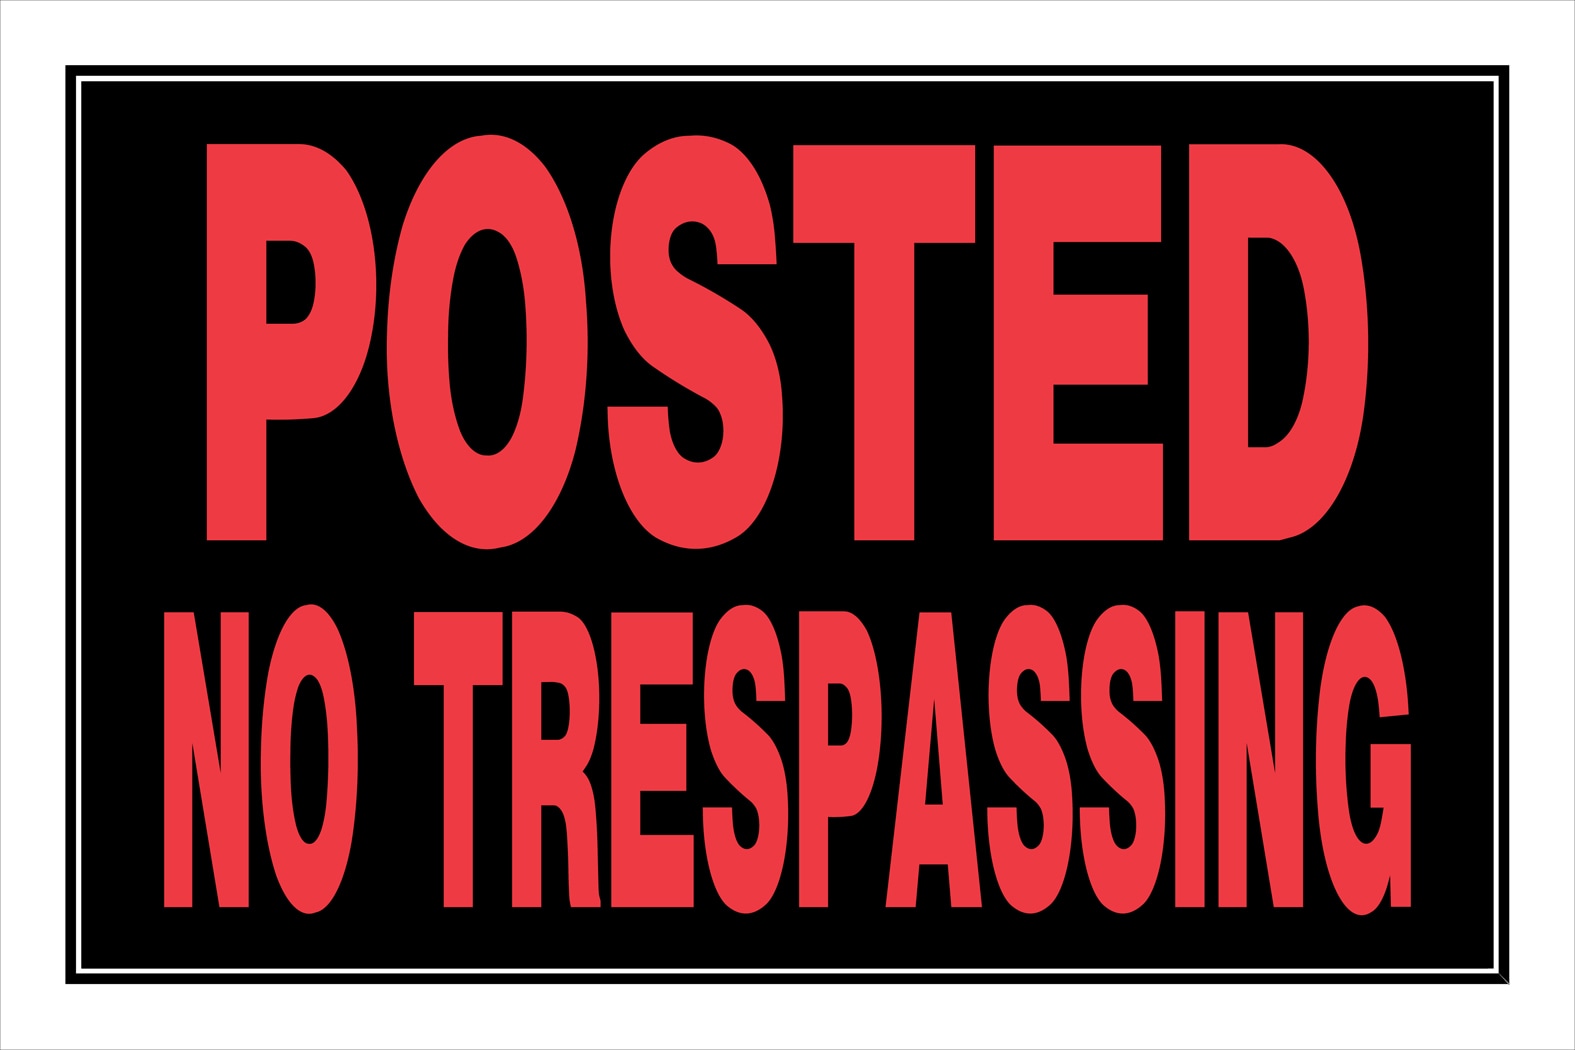 8 Private Property No Trespassing Sign 9 X 12 Inch for sale online 